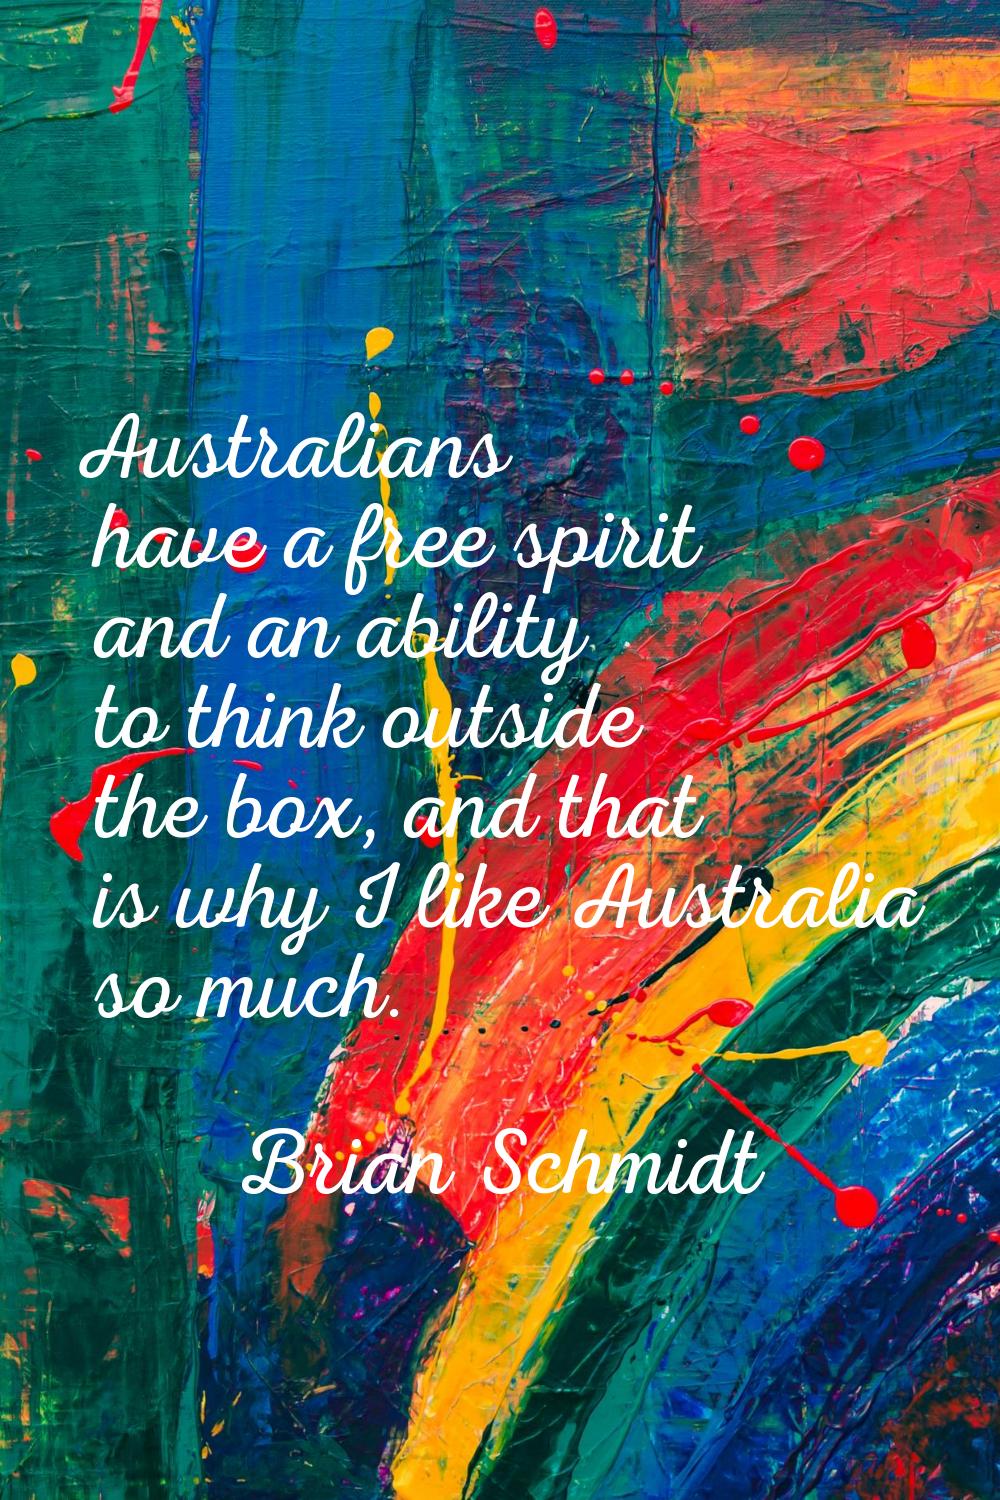 Australians have a free spirit and an ability to think outside the box, and that is why I like Aust